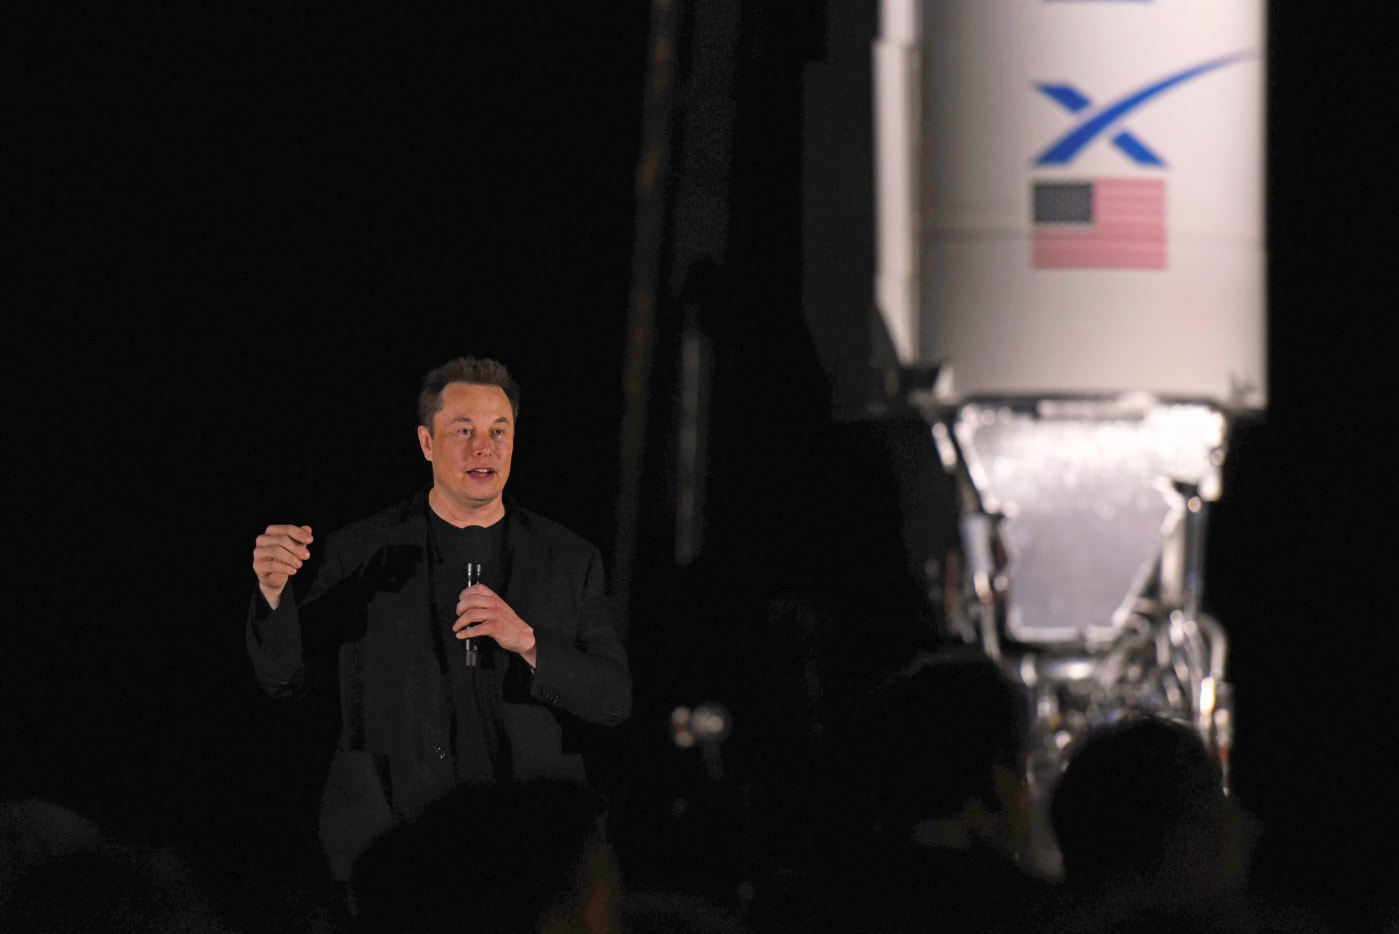 SpaceX moves its legal home to Texas from Delaware